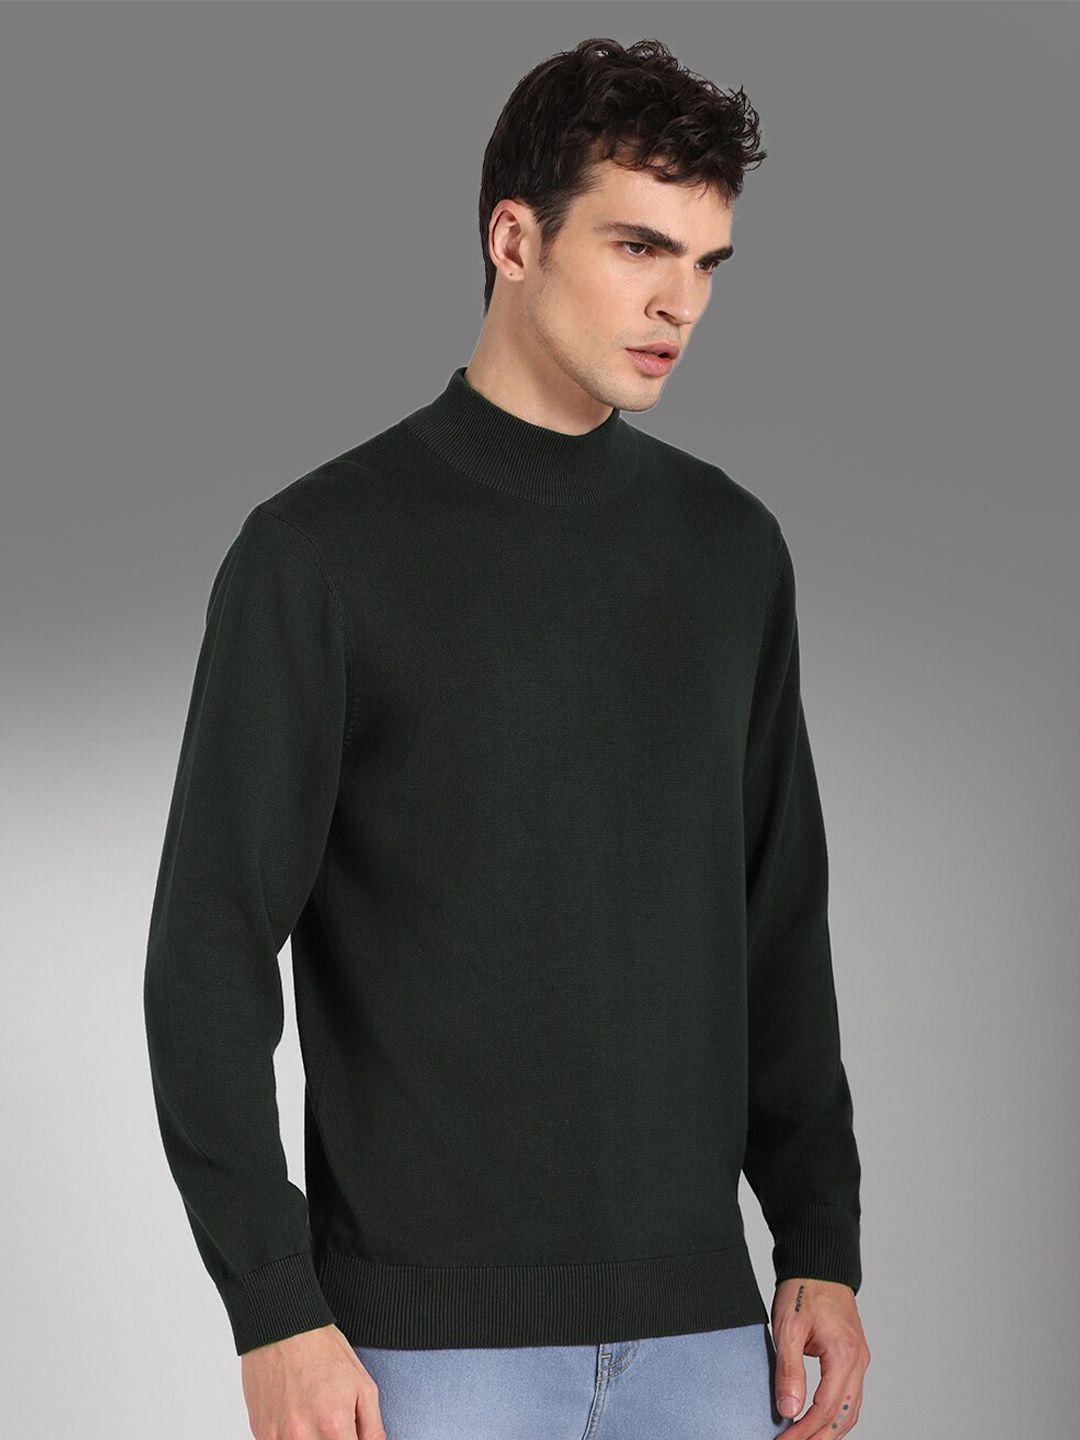 high-star-mock-collar-long-sleeves-cotton-pullover-sweater